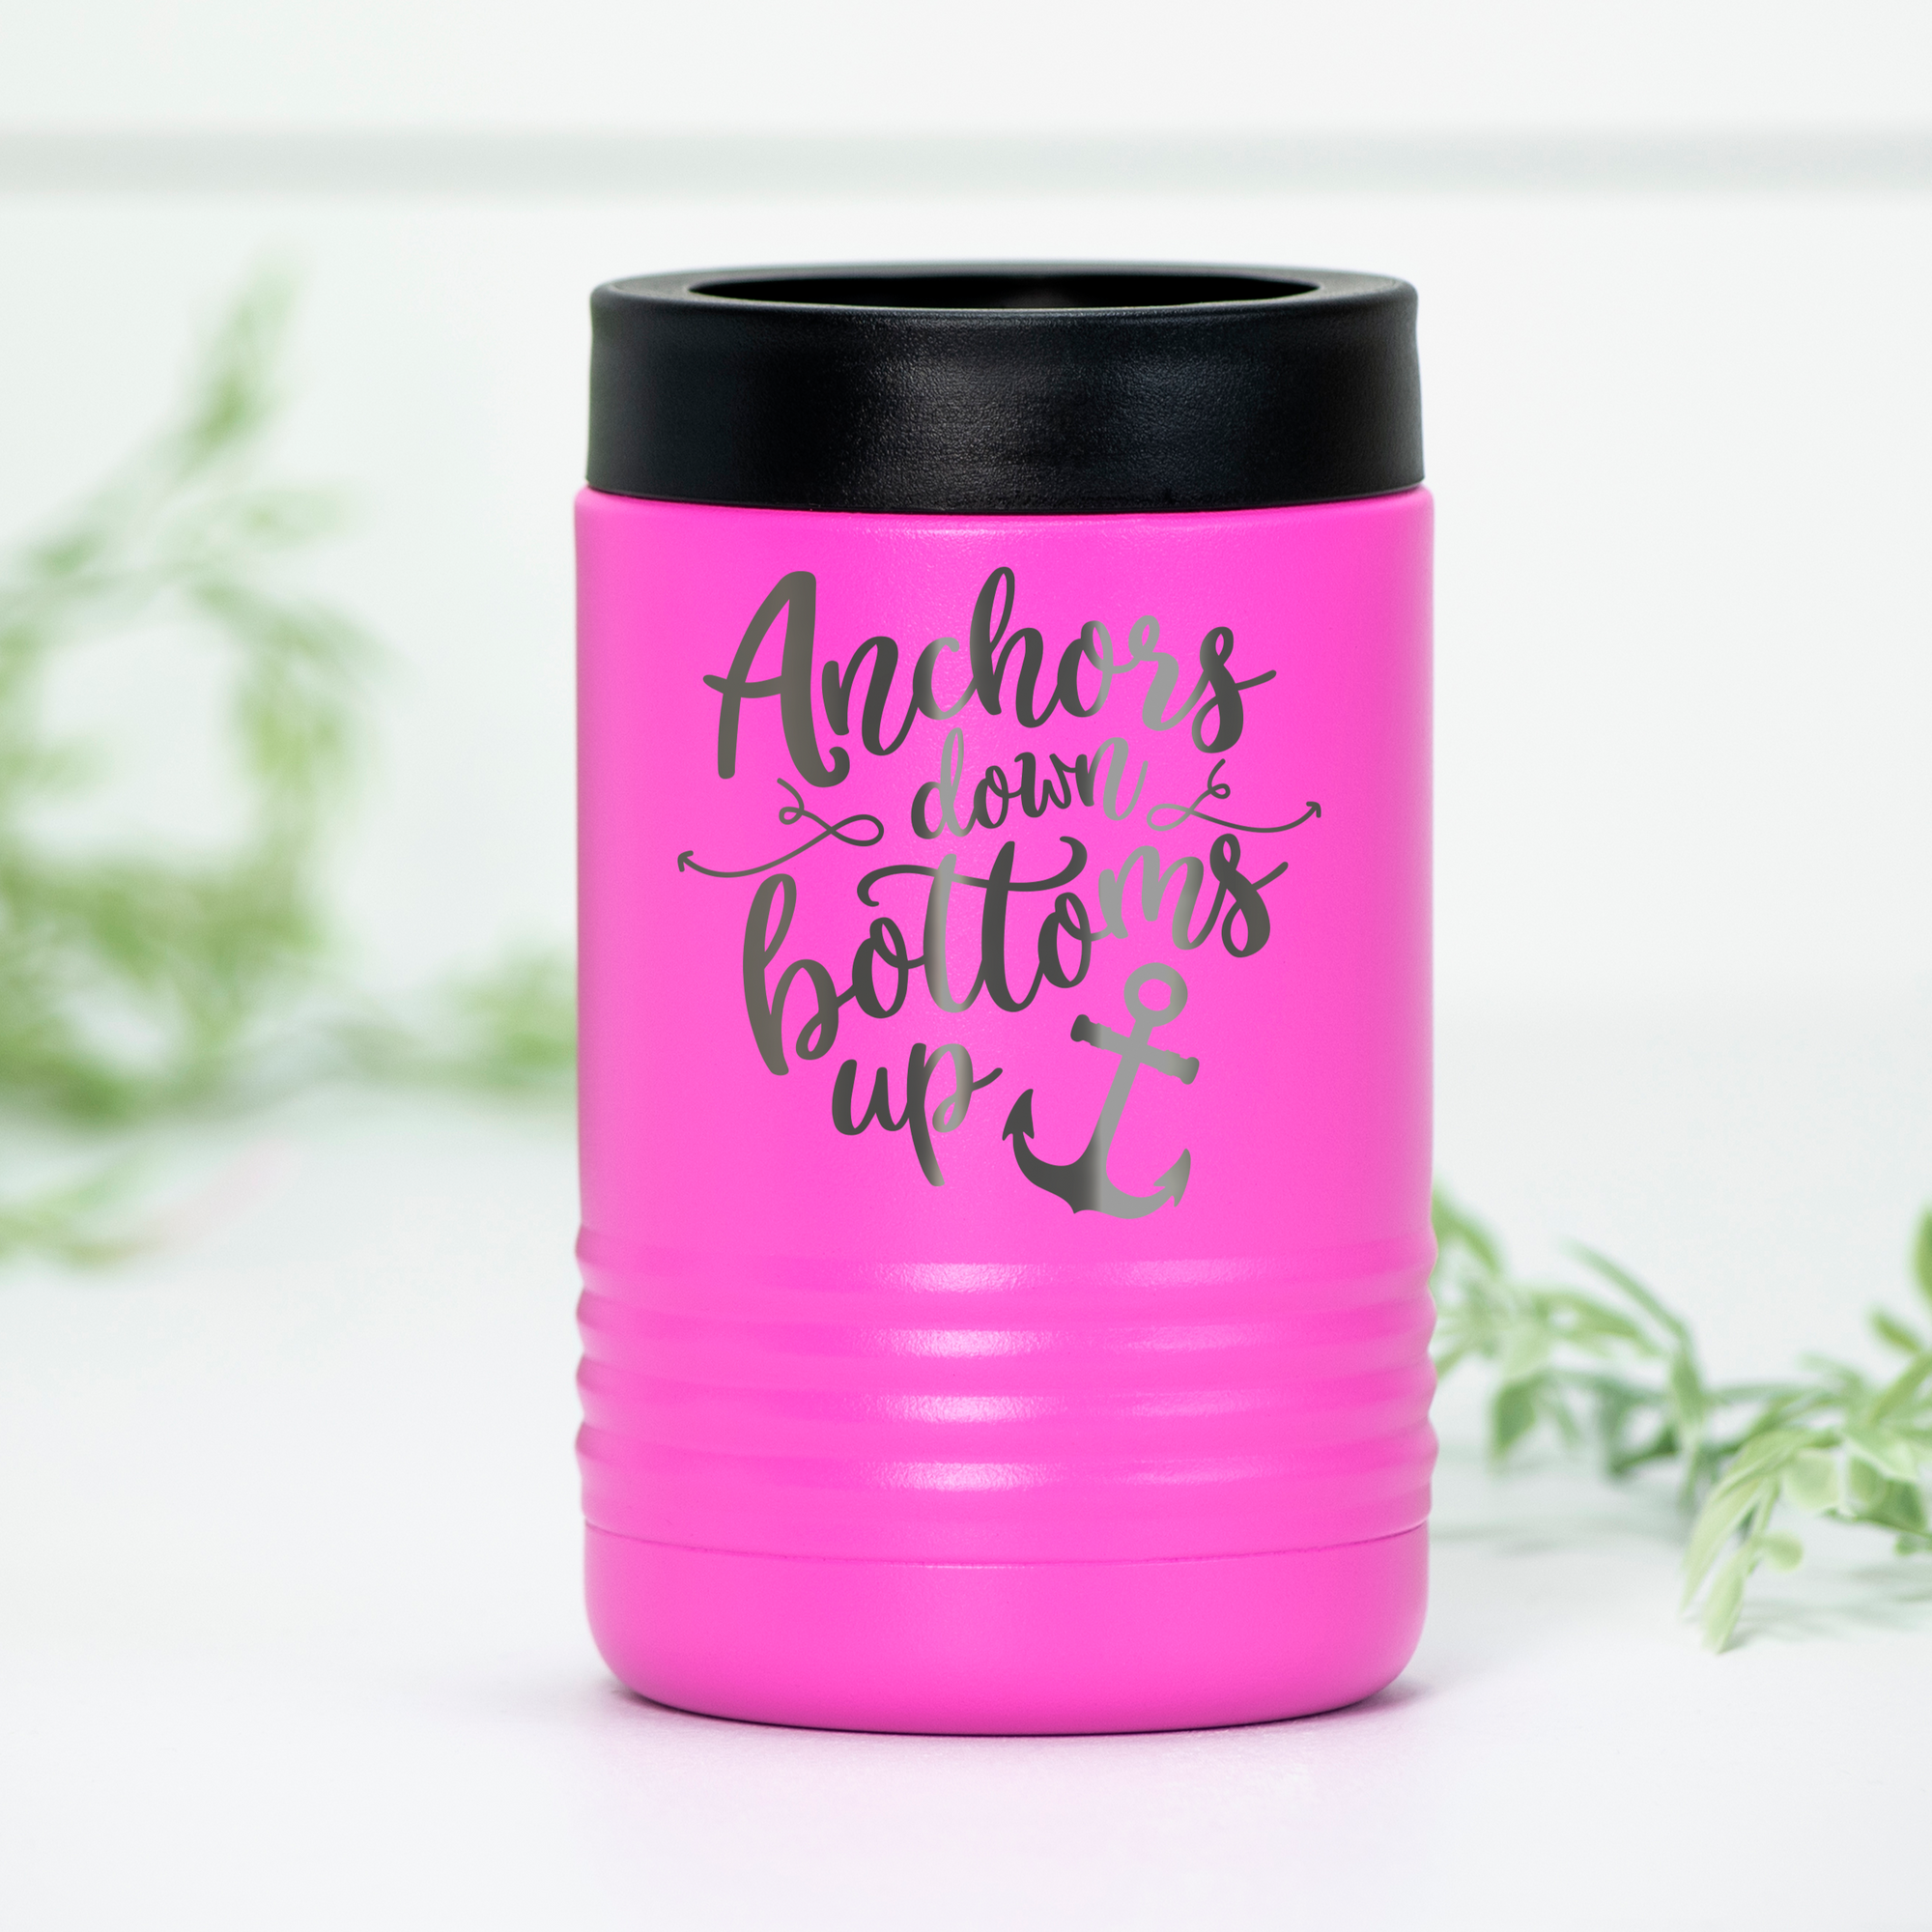 Anchors Down Bottoms Up Engraved Can Cooler